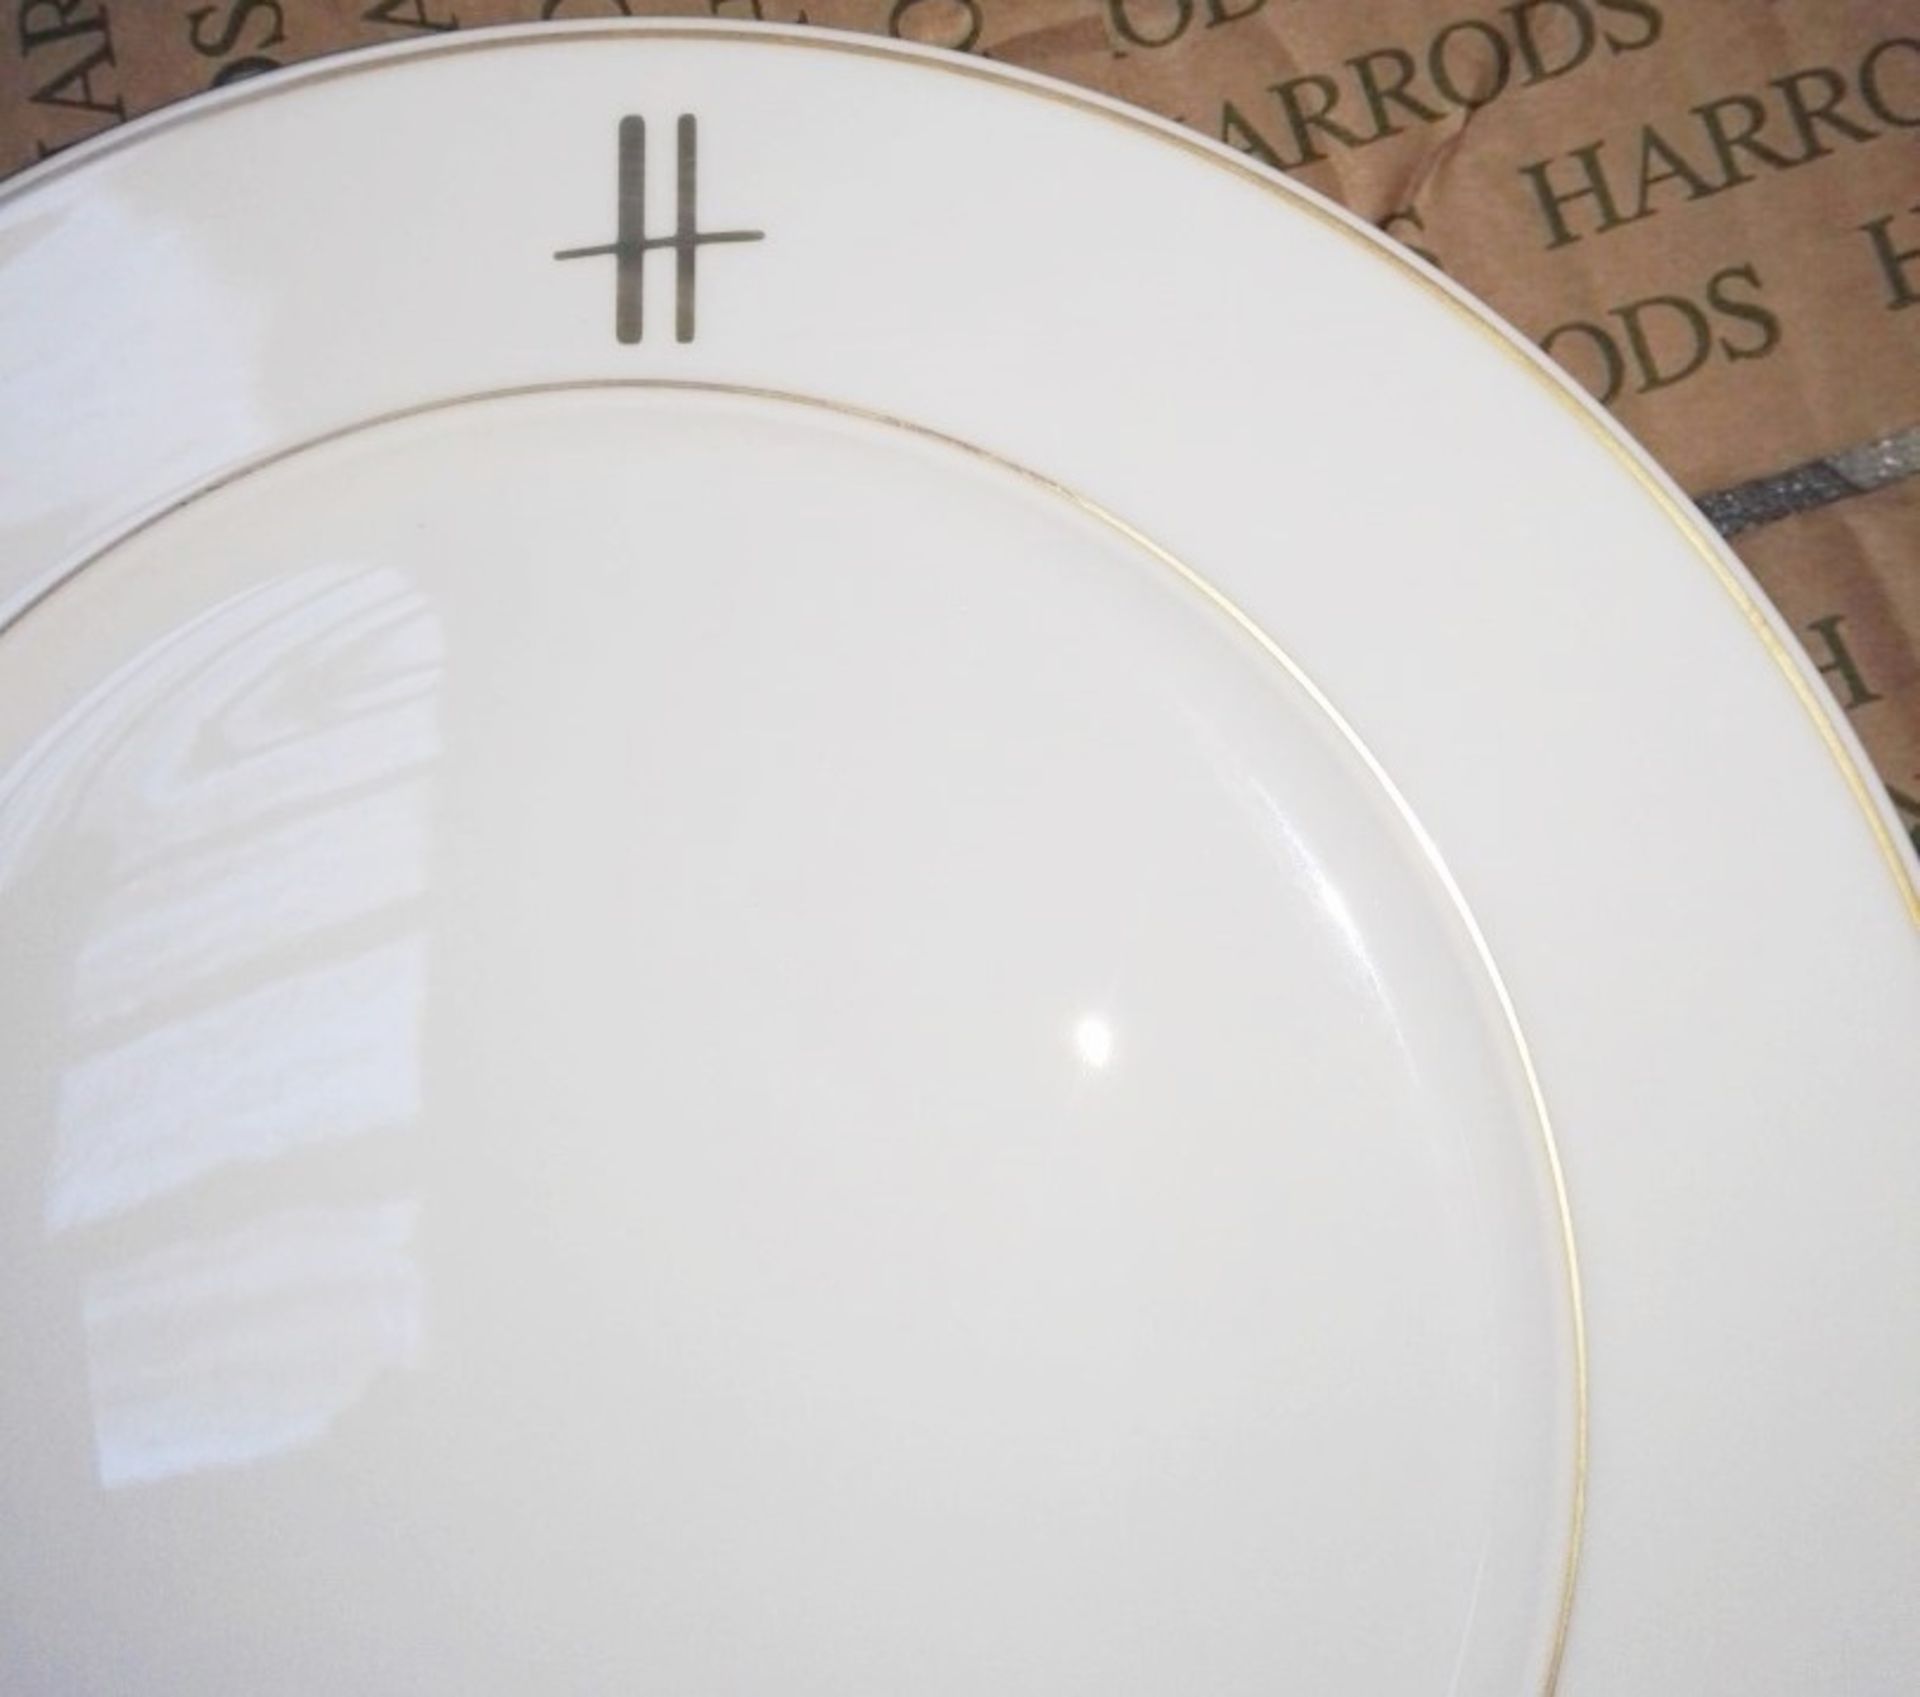 25 x PILLIVUYT Porcelain Dinner Plates In White Featuring 'Famous Branding' In Gold - Dimensions: - Image 5 of 5